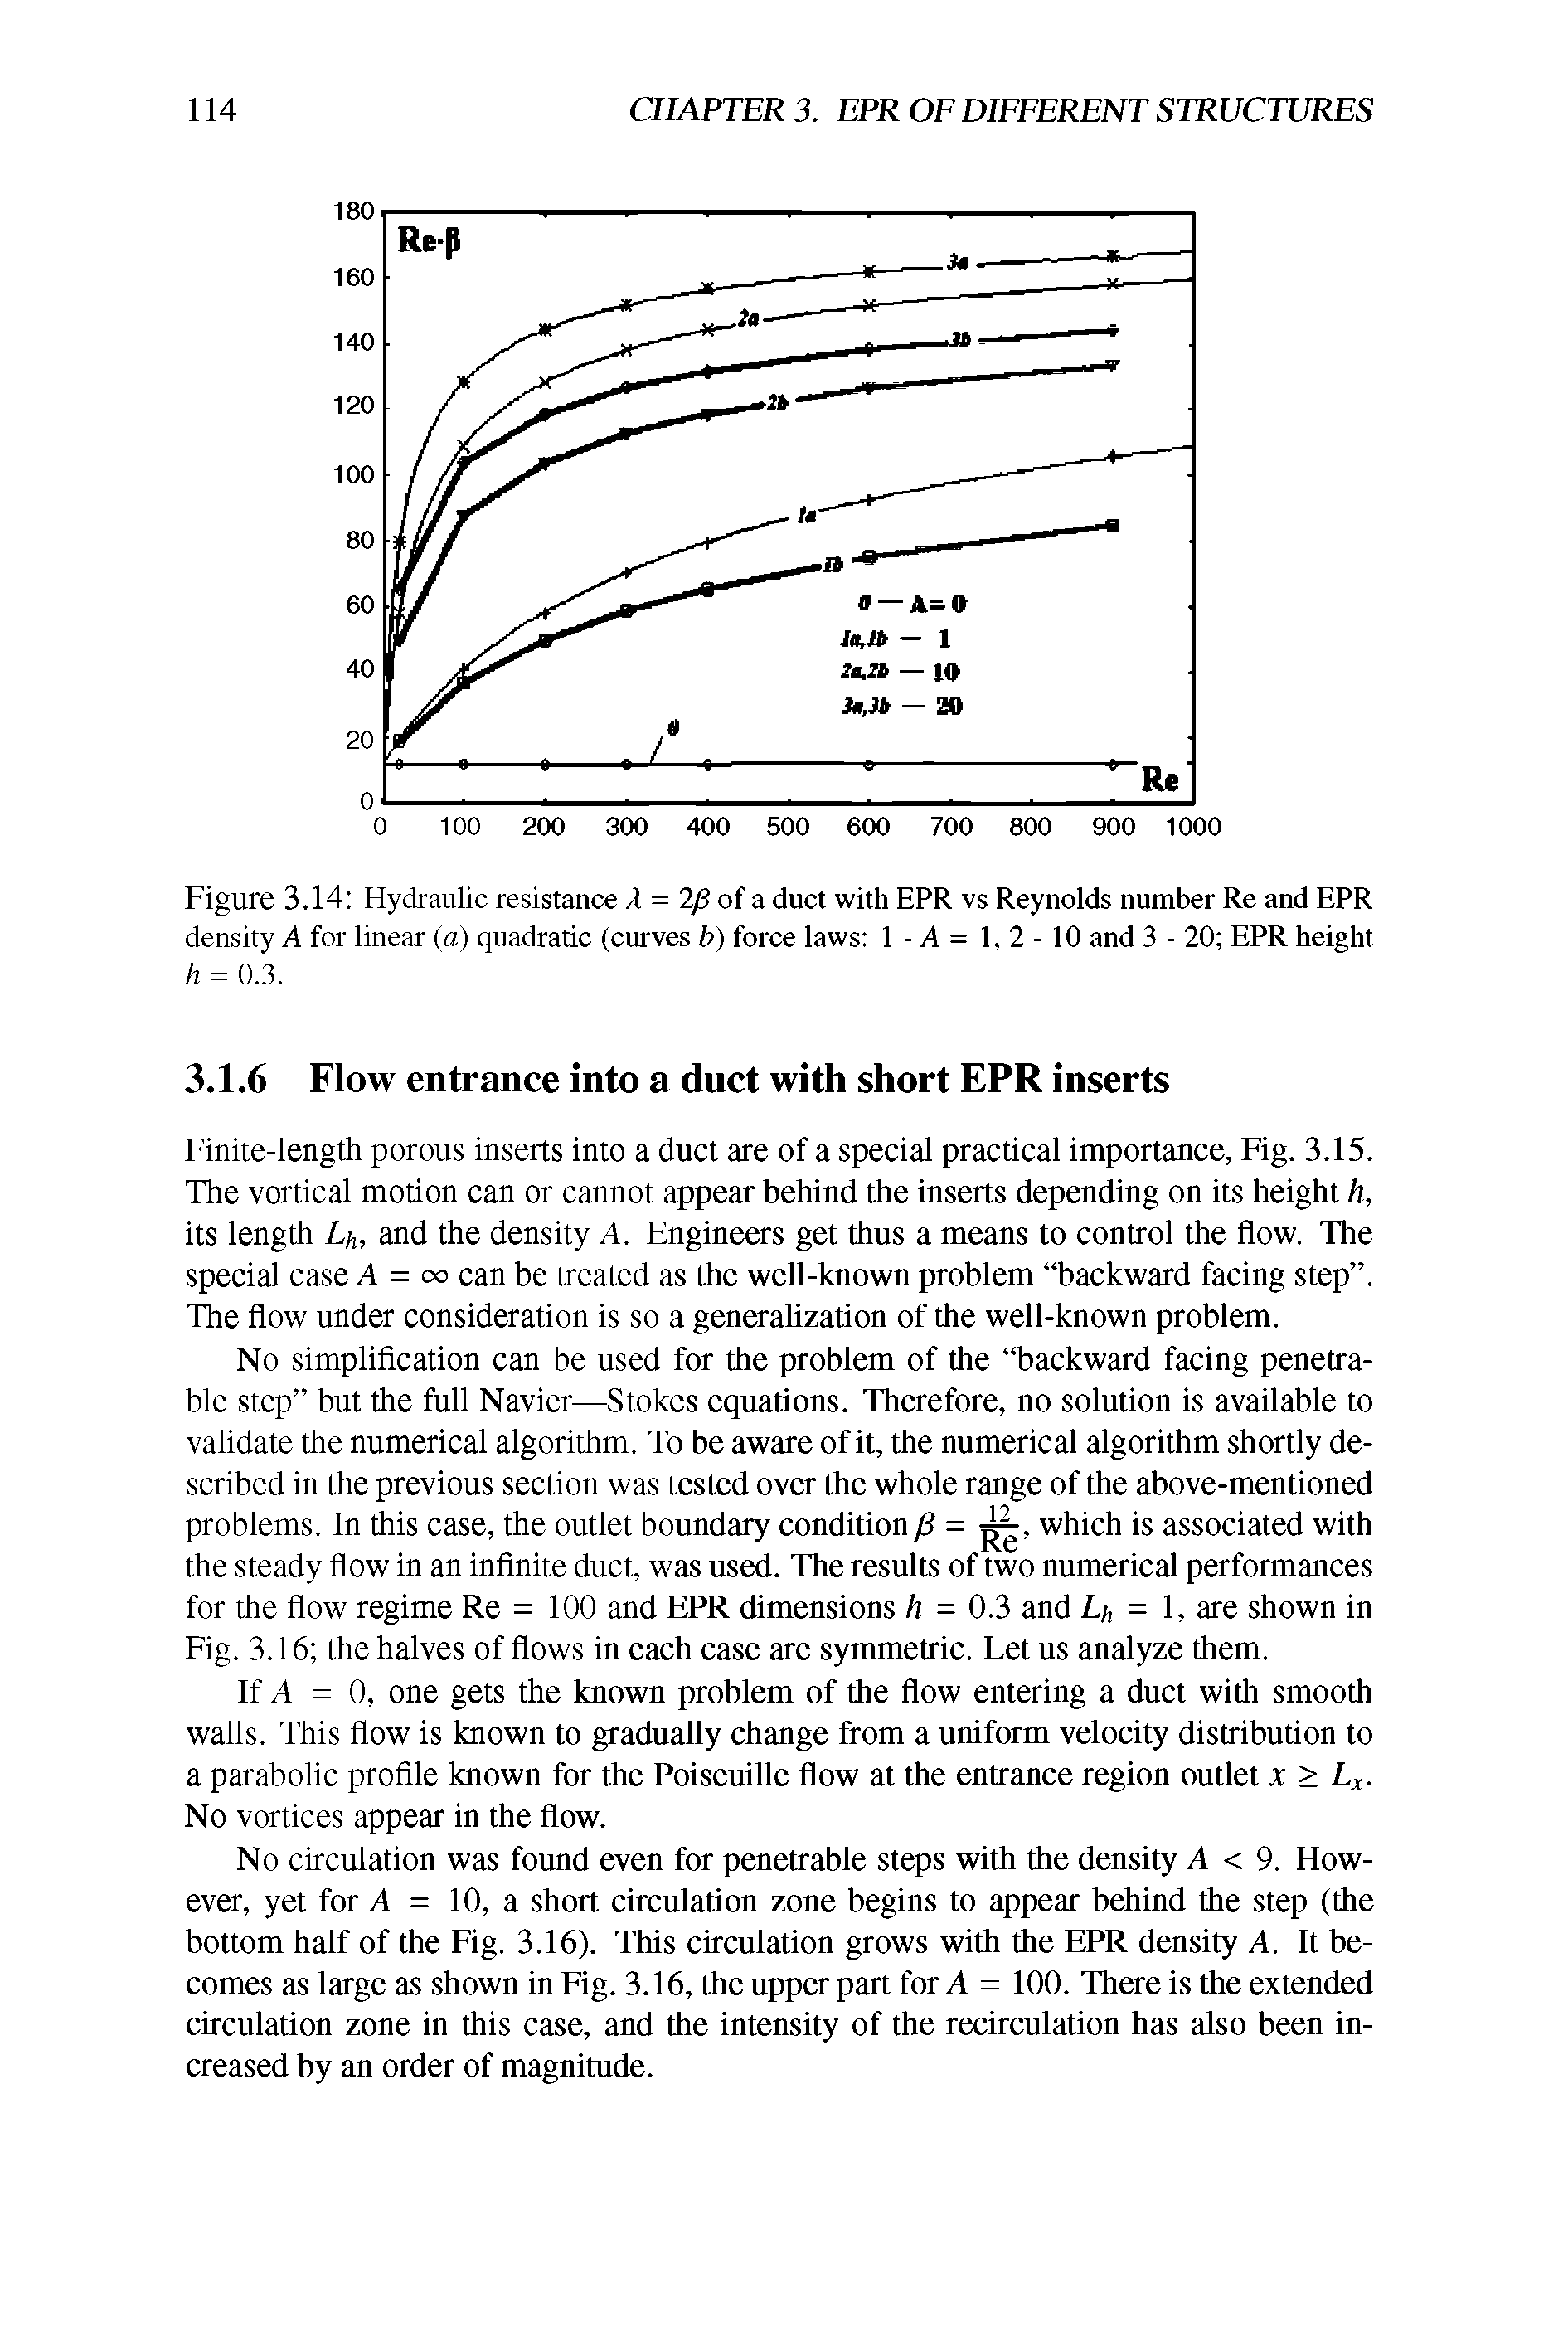 Figure 3.14 Hydraulic resistance A = 2/ of a duct with EPR vs Reynolds number Re and EPR density A for linear (a) quadratic (curves b) force laws 1-4=1,2-10 and 3 - 20 EPR height h = 0.3.